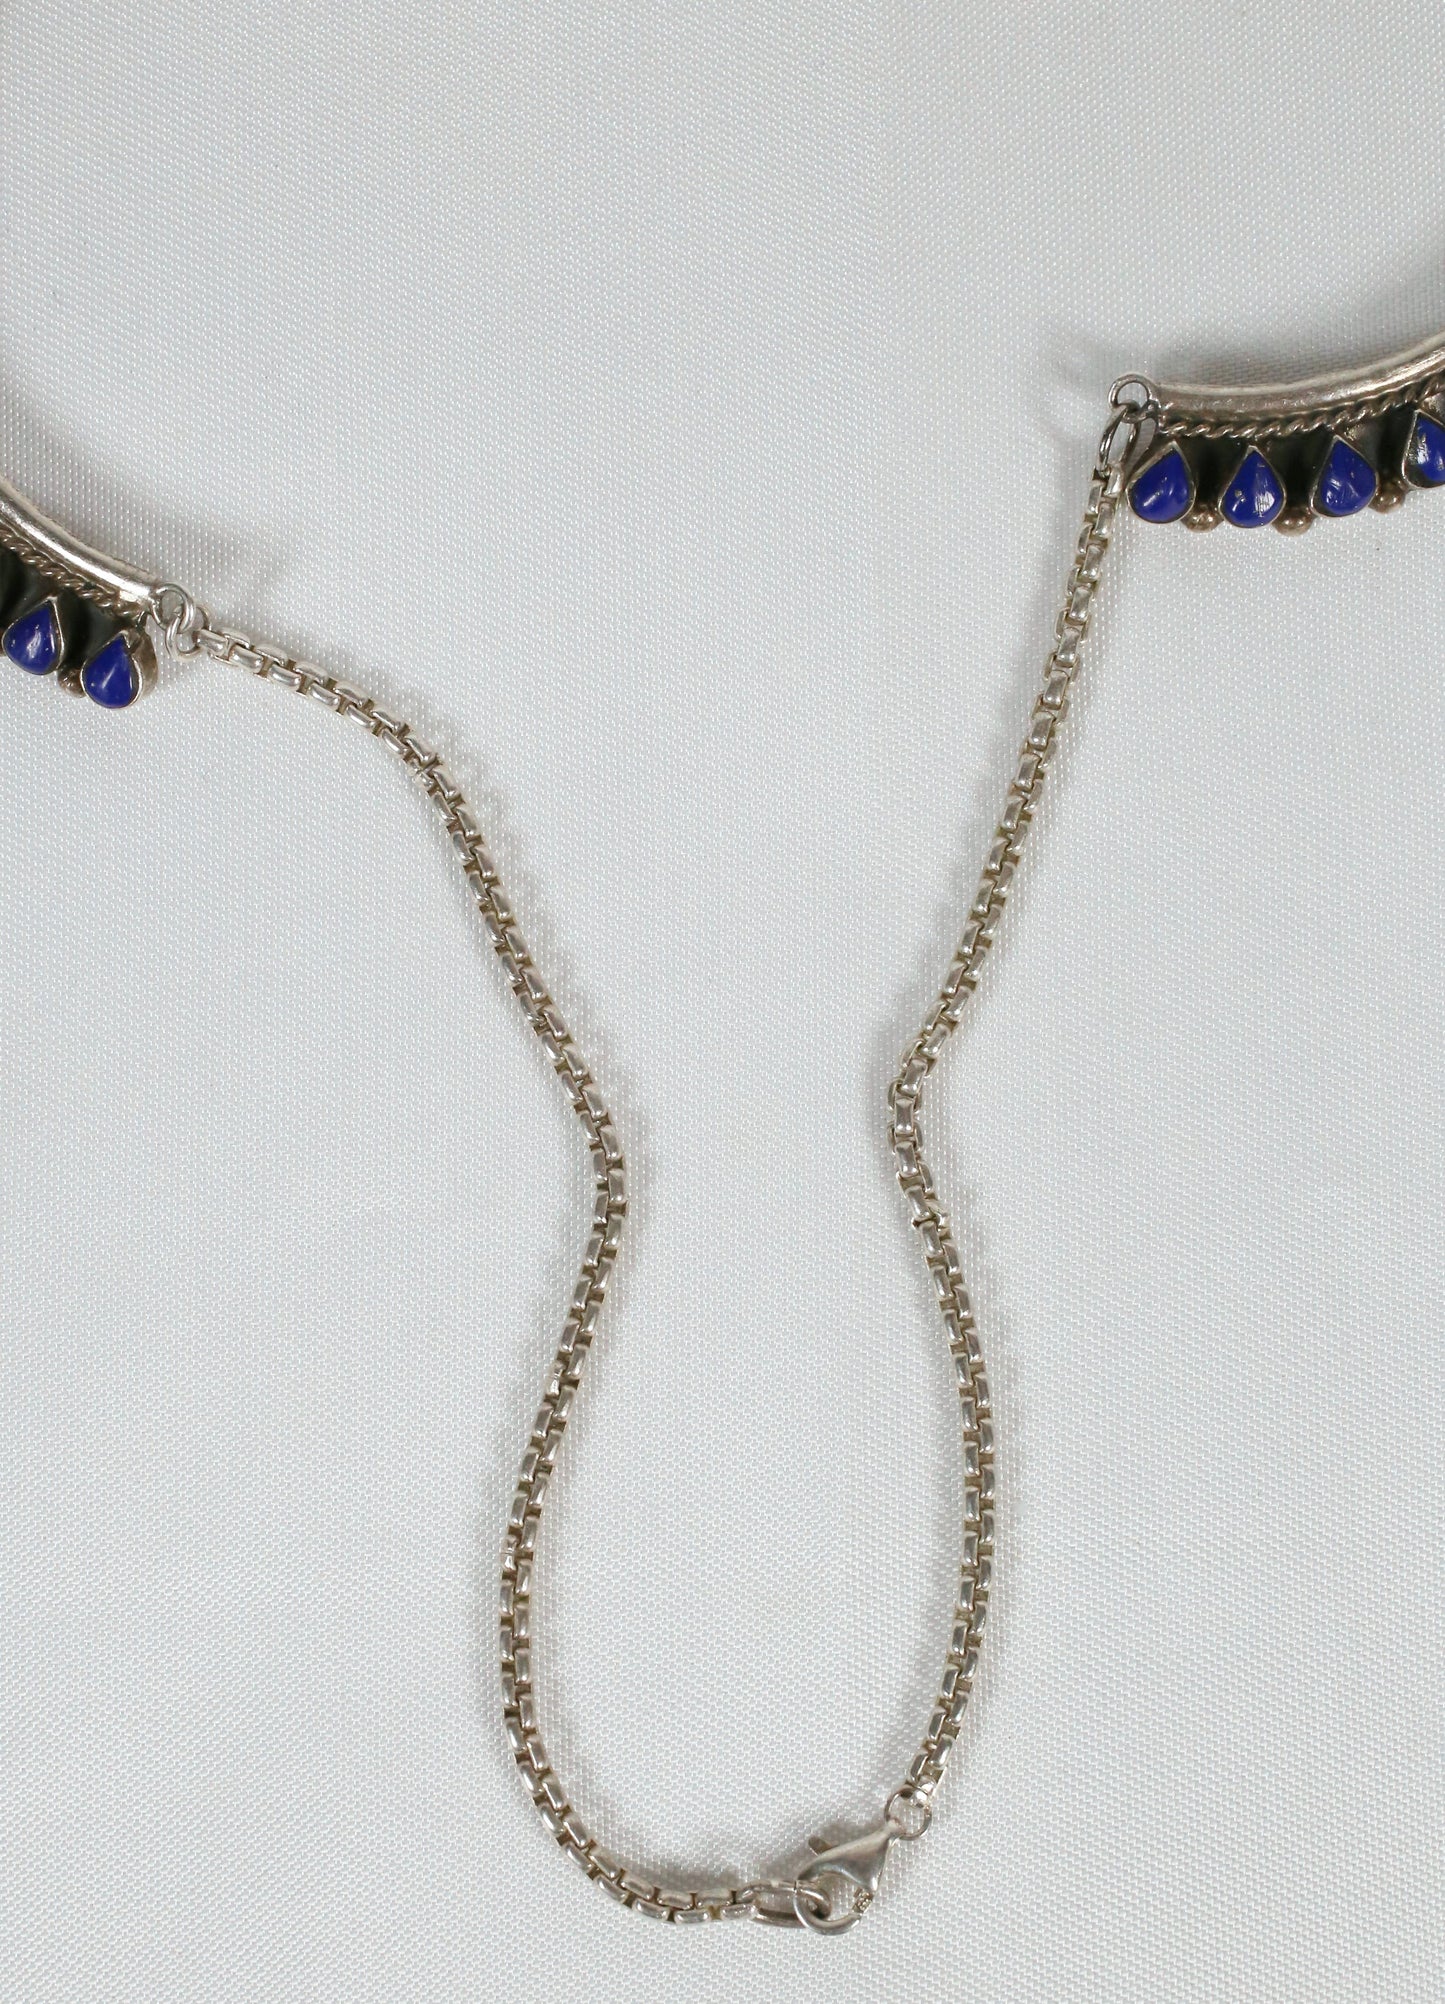 Vintage Mexican Sterling Silver Necklace, 18 inches - 32.7g